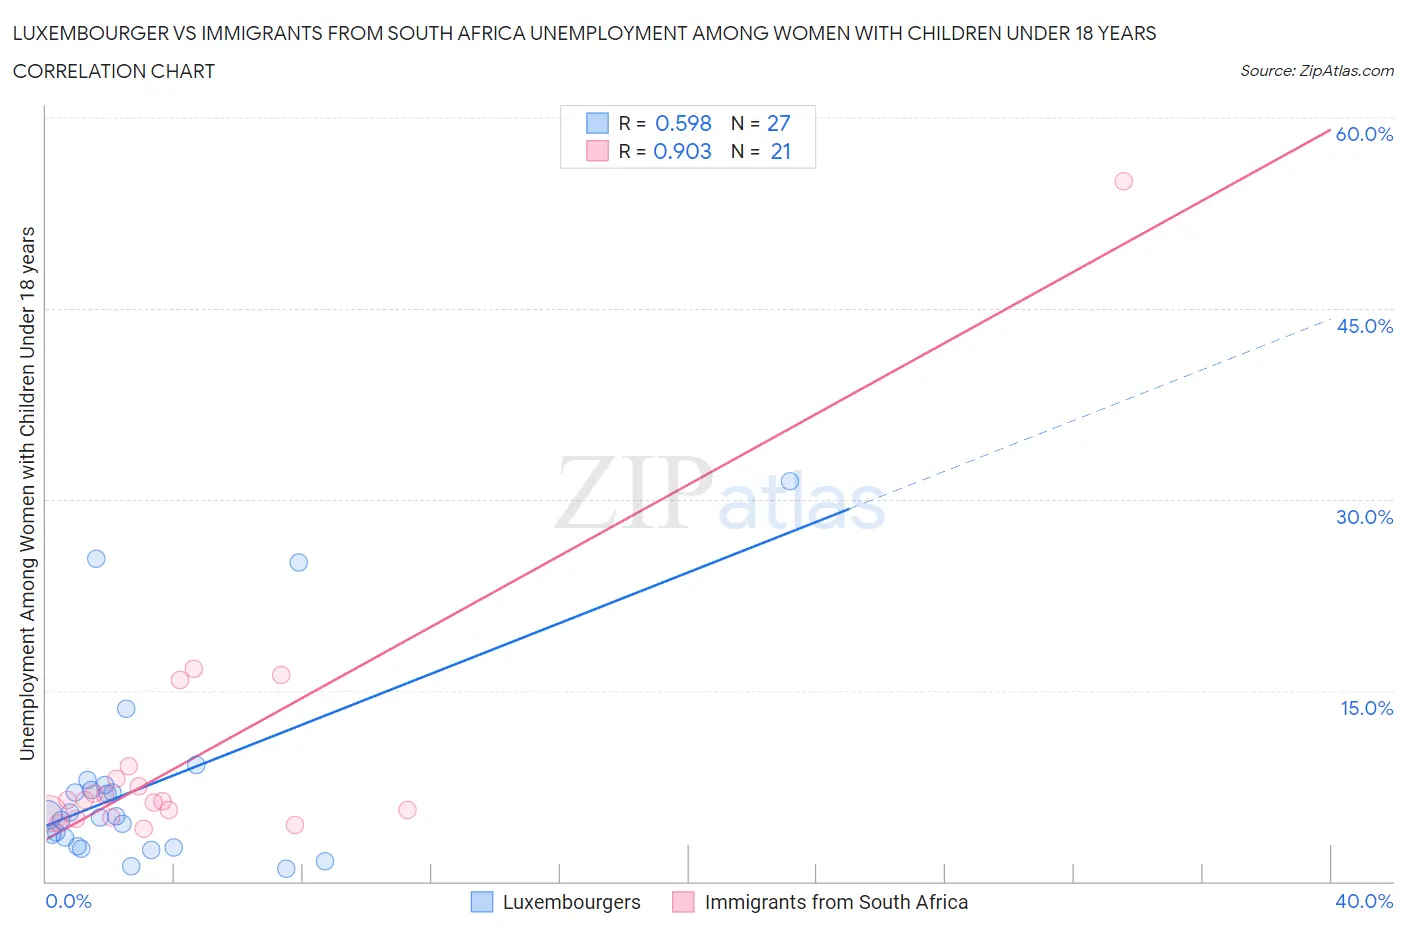 Luxembourger vs Immigrants from South Africa Unemployment Among Women with Children Under 18 years